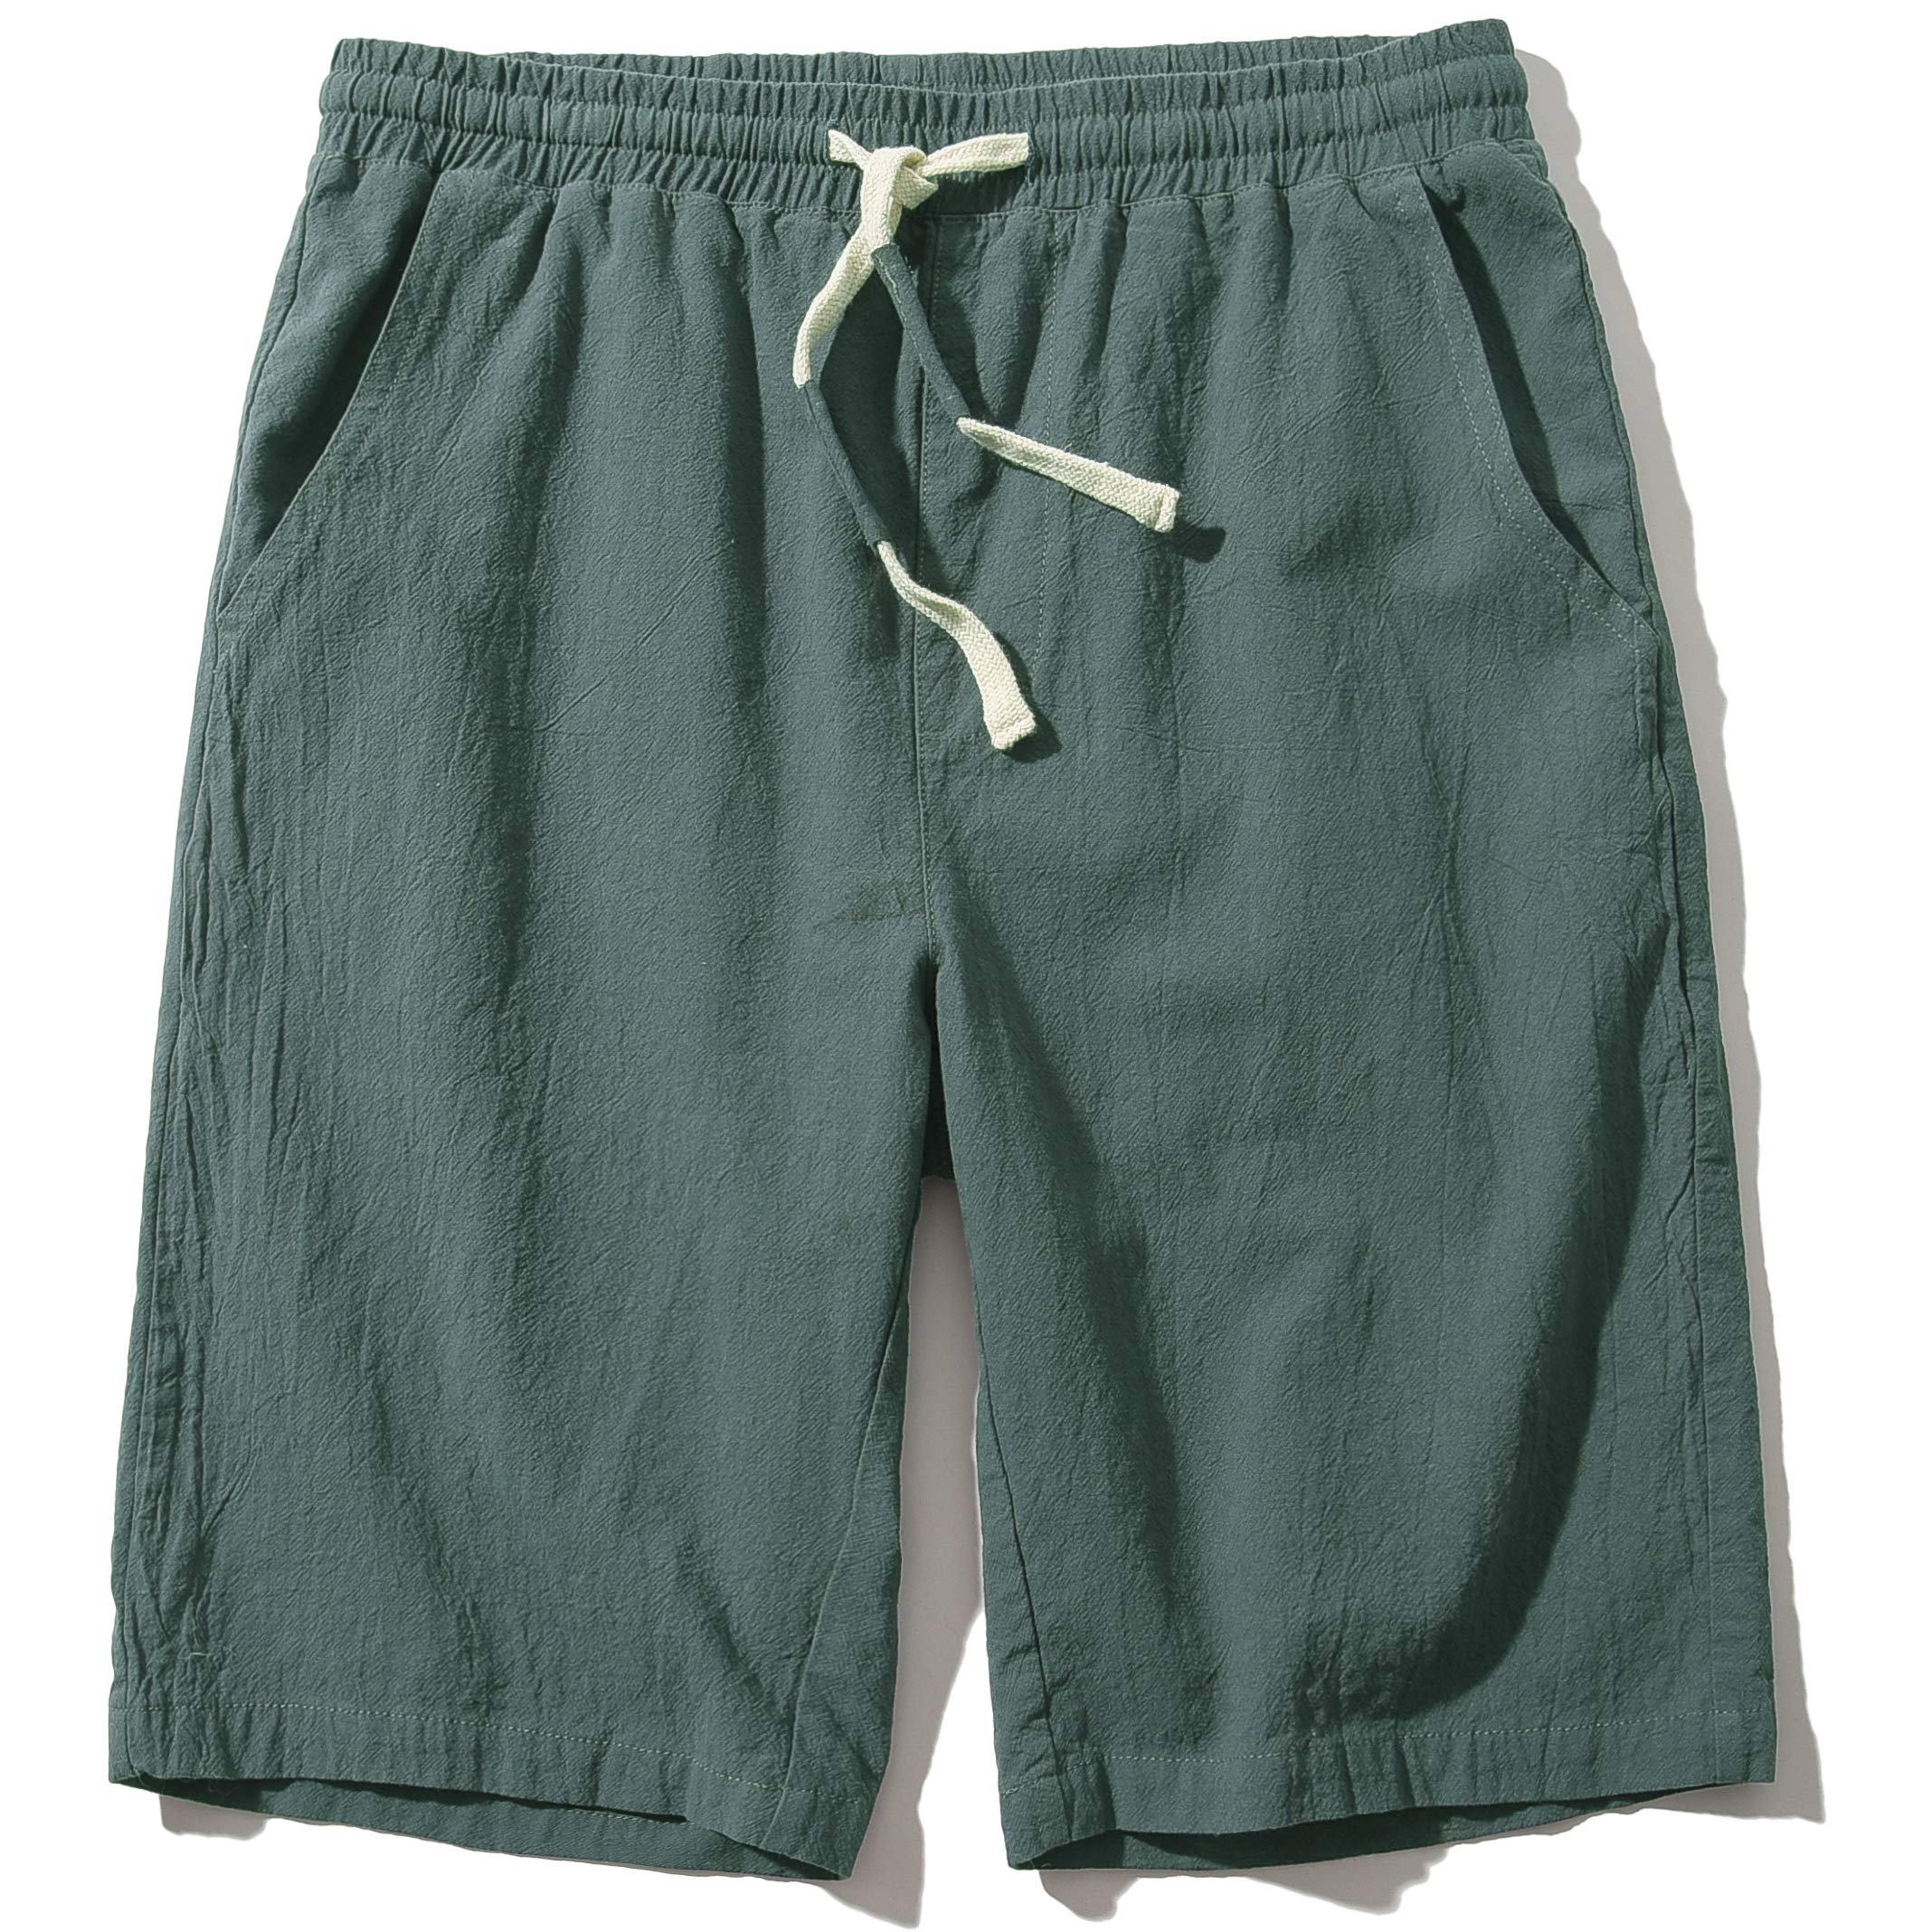 Mens elastic waist shorts, elastic waist shorts offer a range of advantages that make them a popular and practical choice for many individuals.